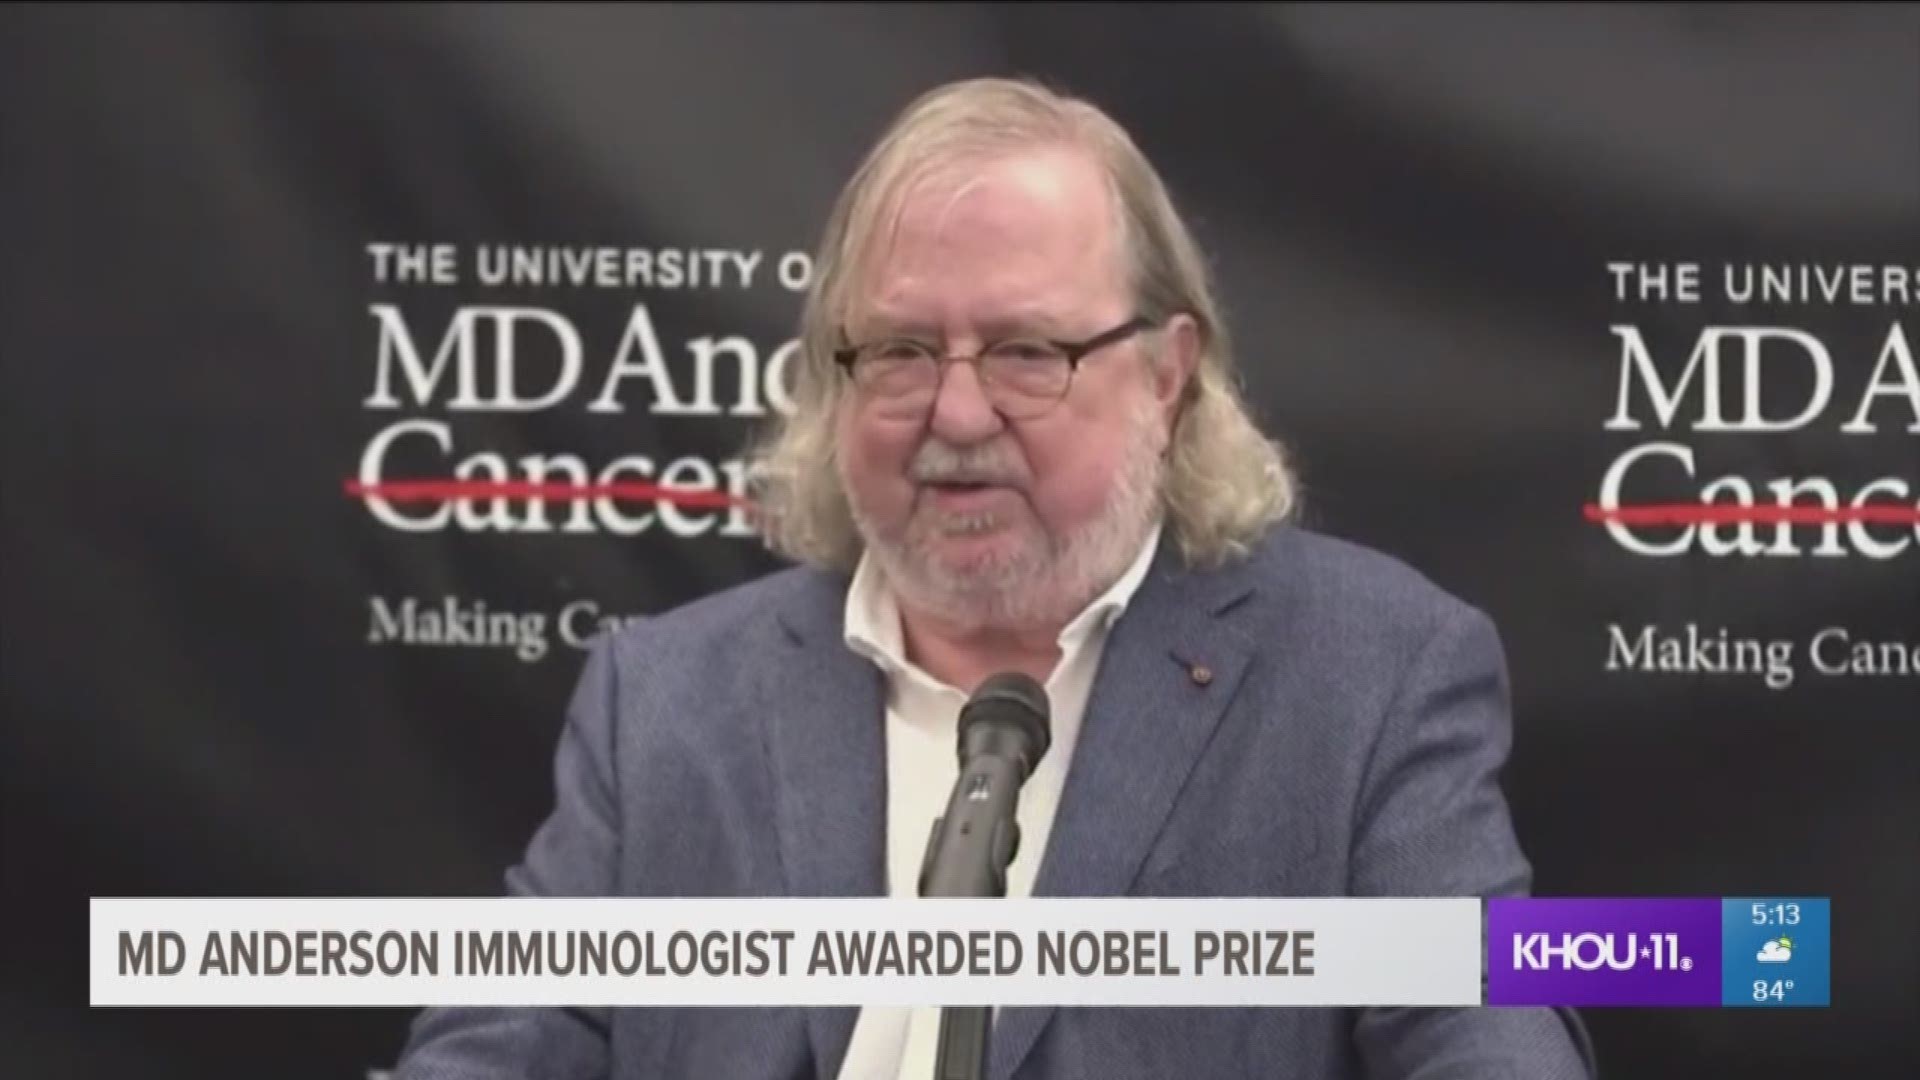 Jim Allison, Ph.D., chair of Immunology and executive director of the Immunotherapy Platform at The University of Texas MD Anderson Cancer Center, was awarded the 2018 Nobel Prize in Physiology or Medicine.